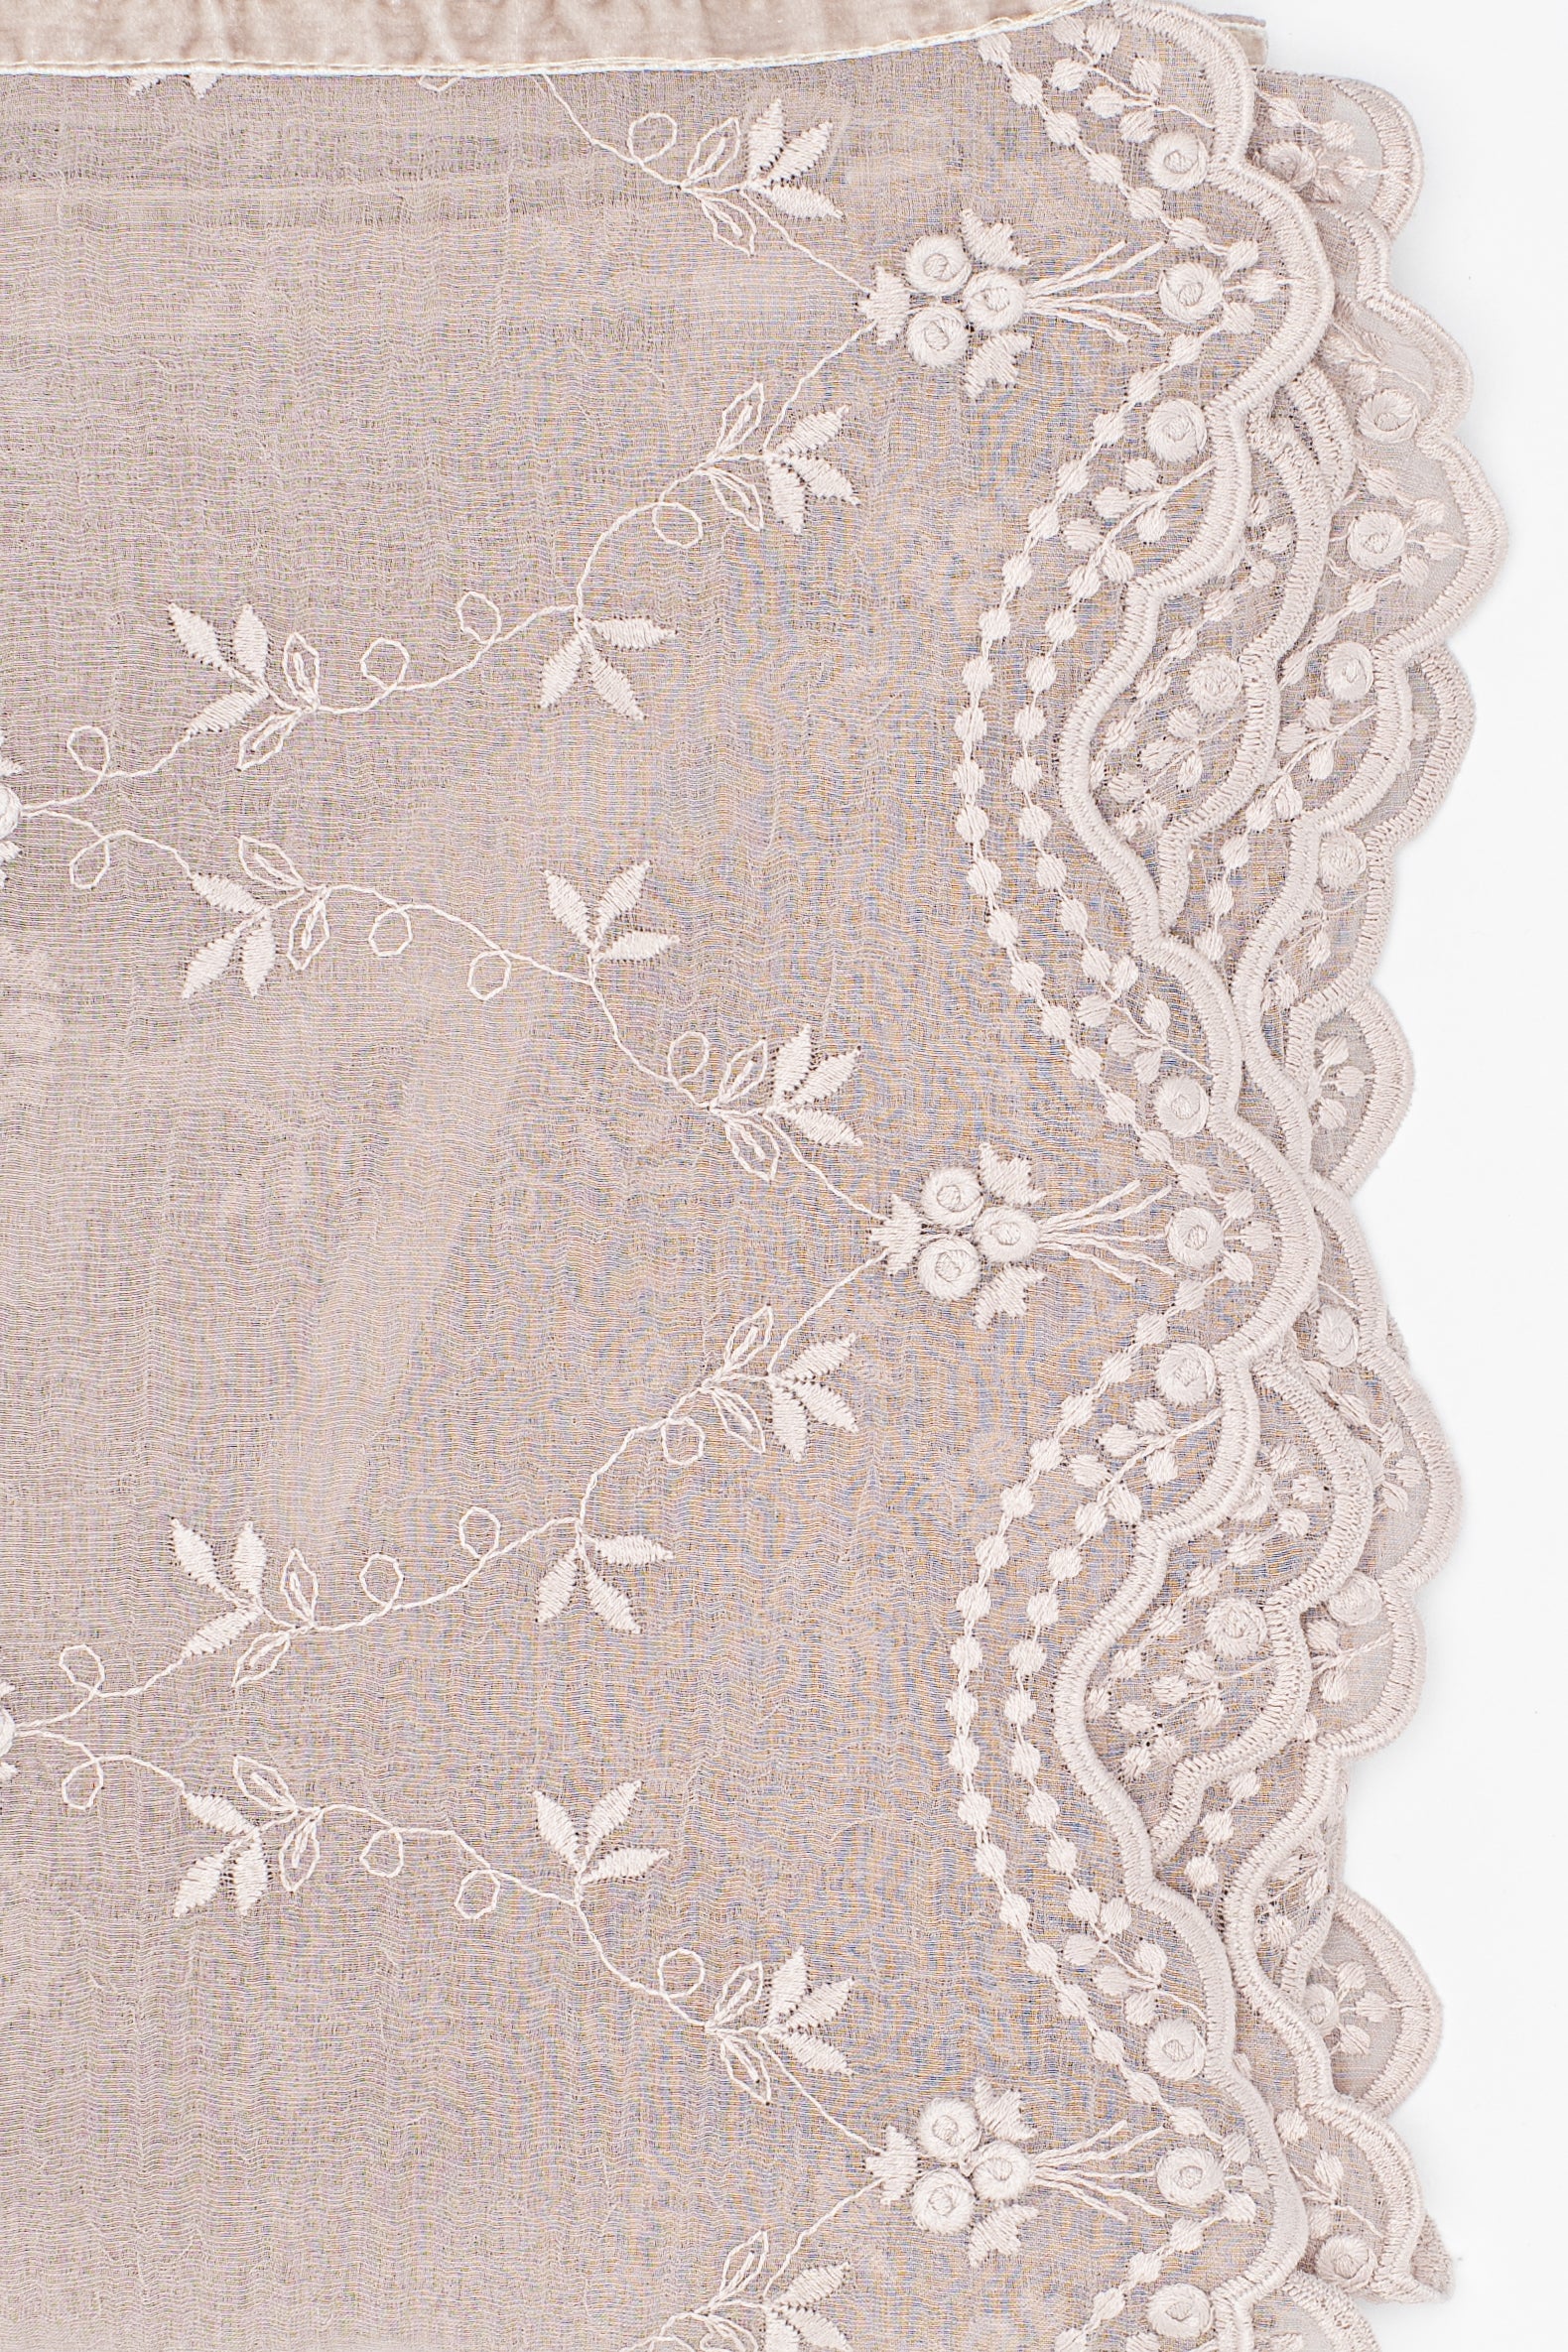 This elegant embroidered voile tablecloth is a perfect fit for any style setting from boho, design to romantic...your table will look fabulous. Dressing your table is a pleasure!